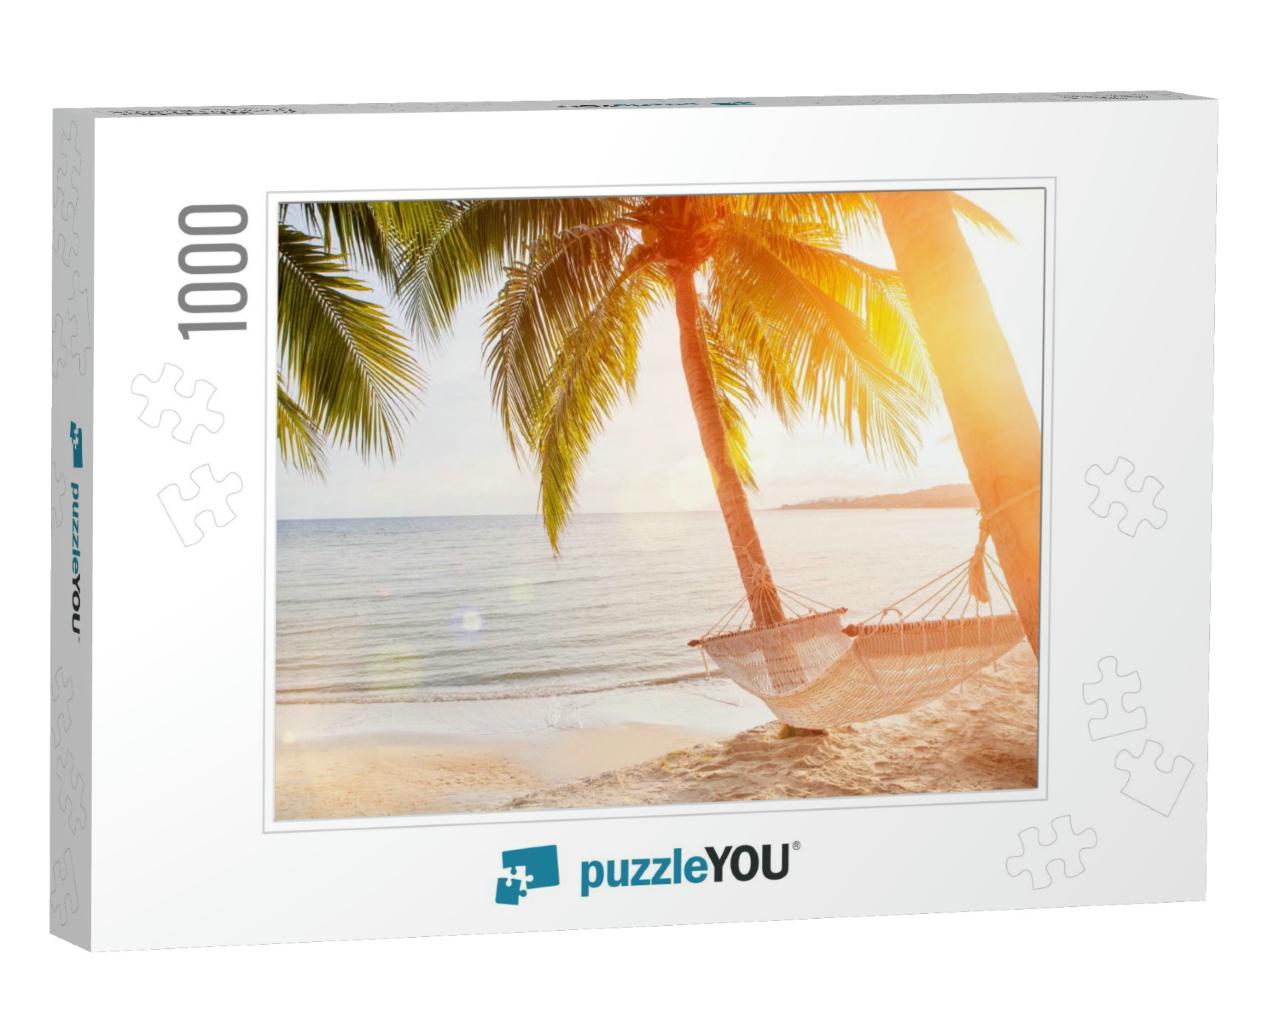 Hammock on a Palm Tree Sunset Glare of the Sun Sea Ocean... Jigsaw Puzzle with 1000 pieces